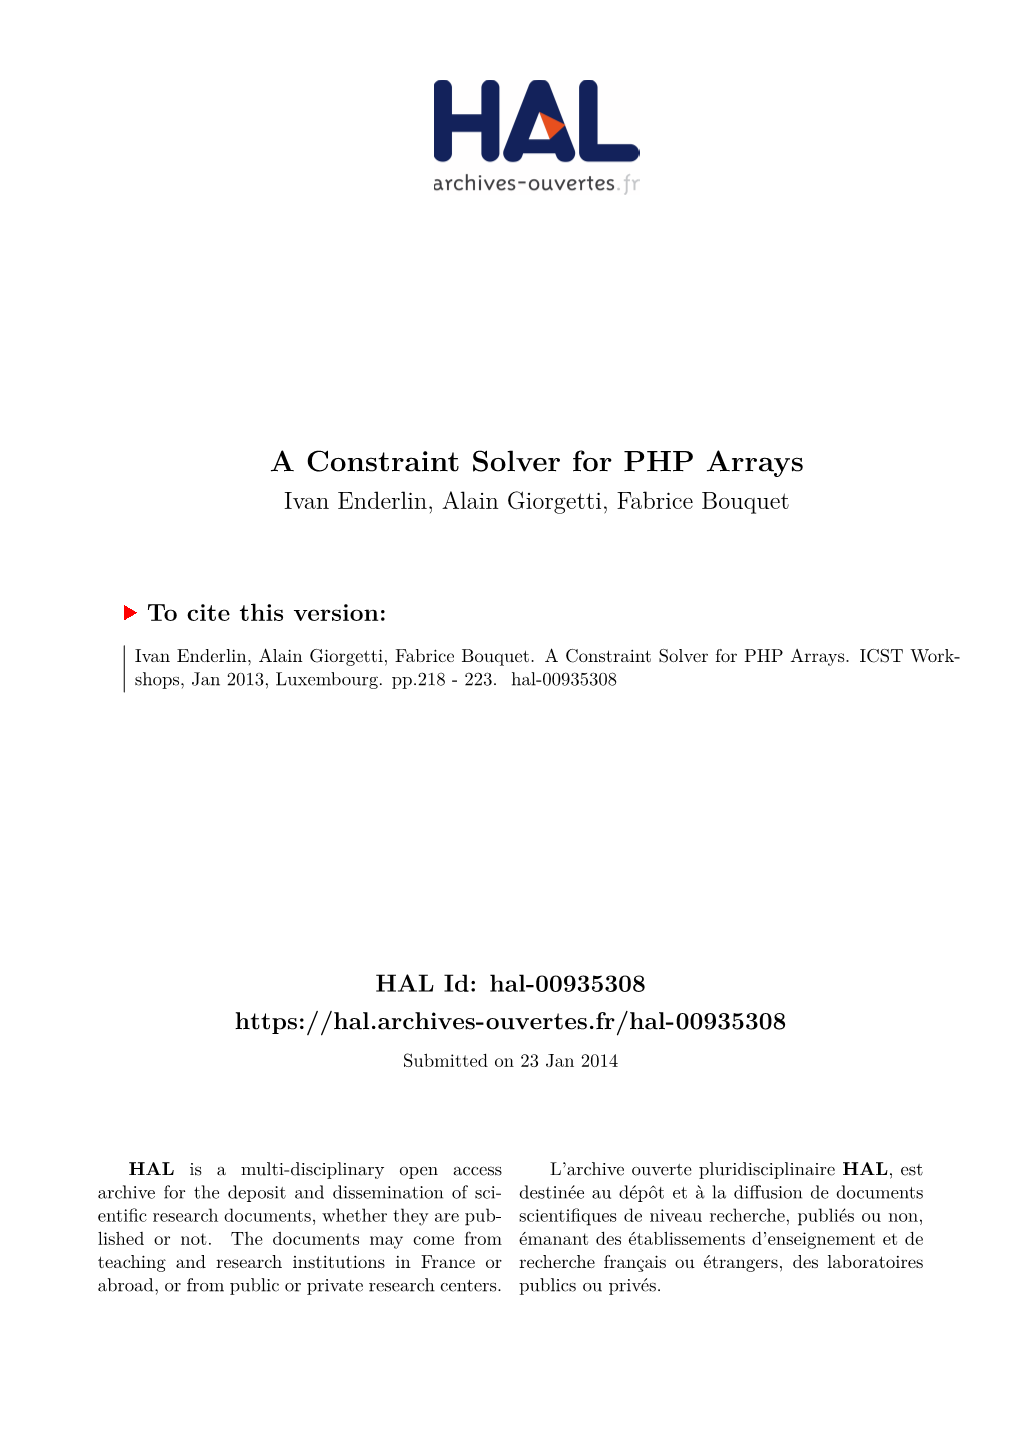 A Constraint Solver for PHP Arrays Ivan Enderlin, Alain Giorgetti, Fabrice Bouquet